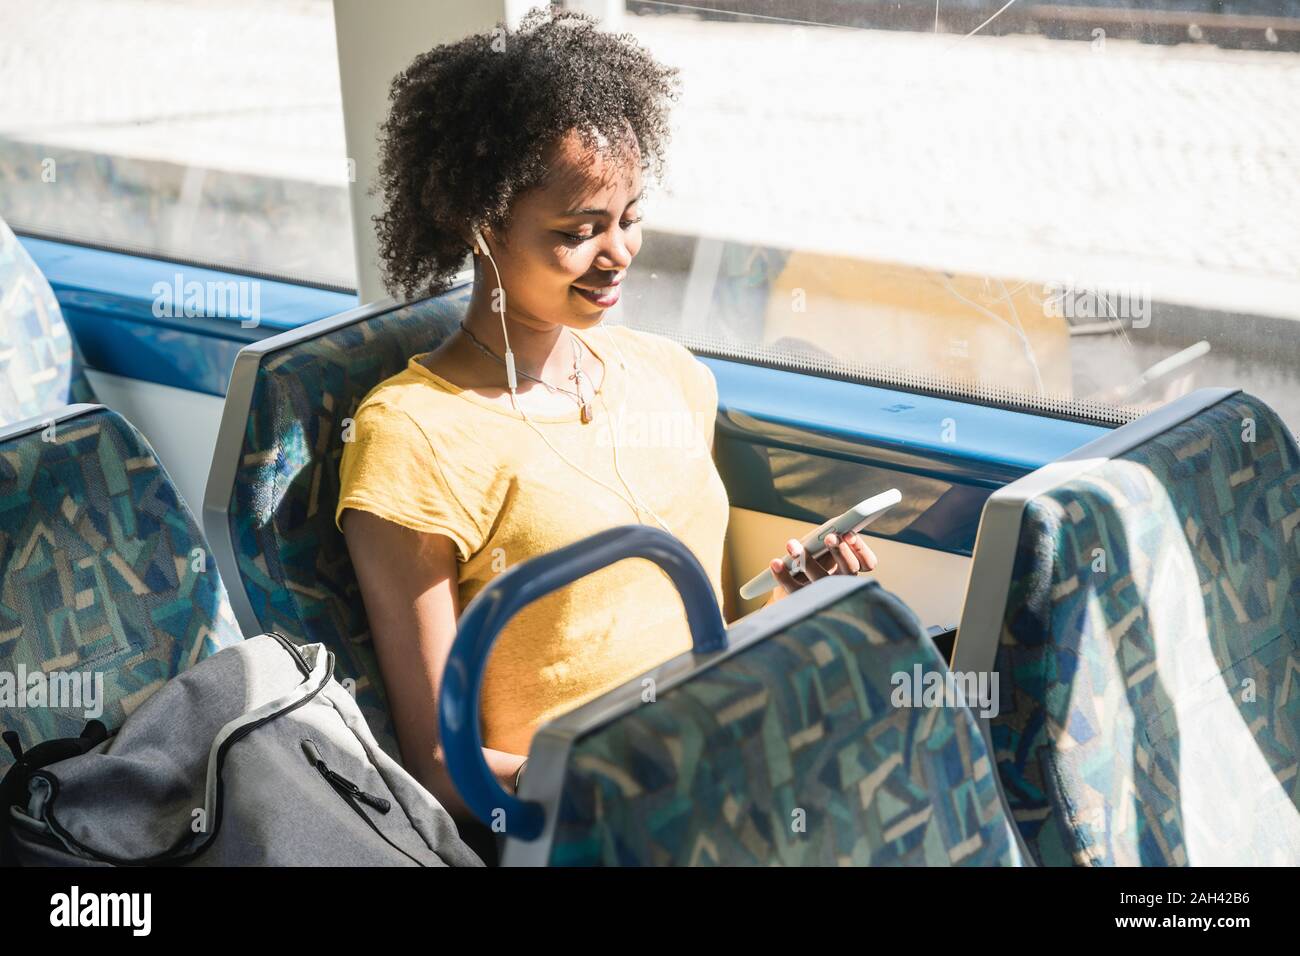 Young woman with earphones using smartphone on a train Stock Photo